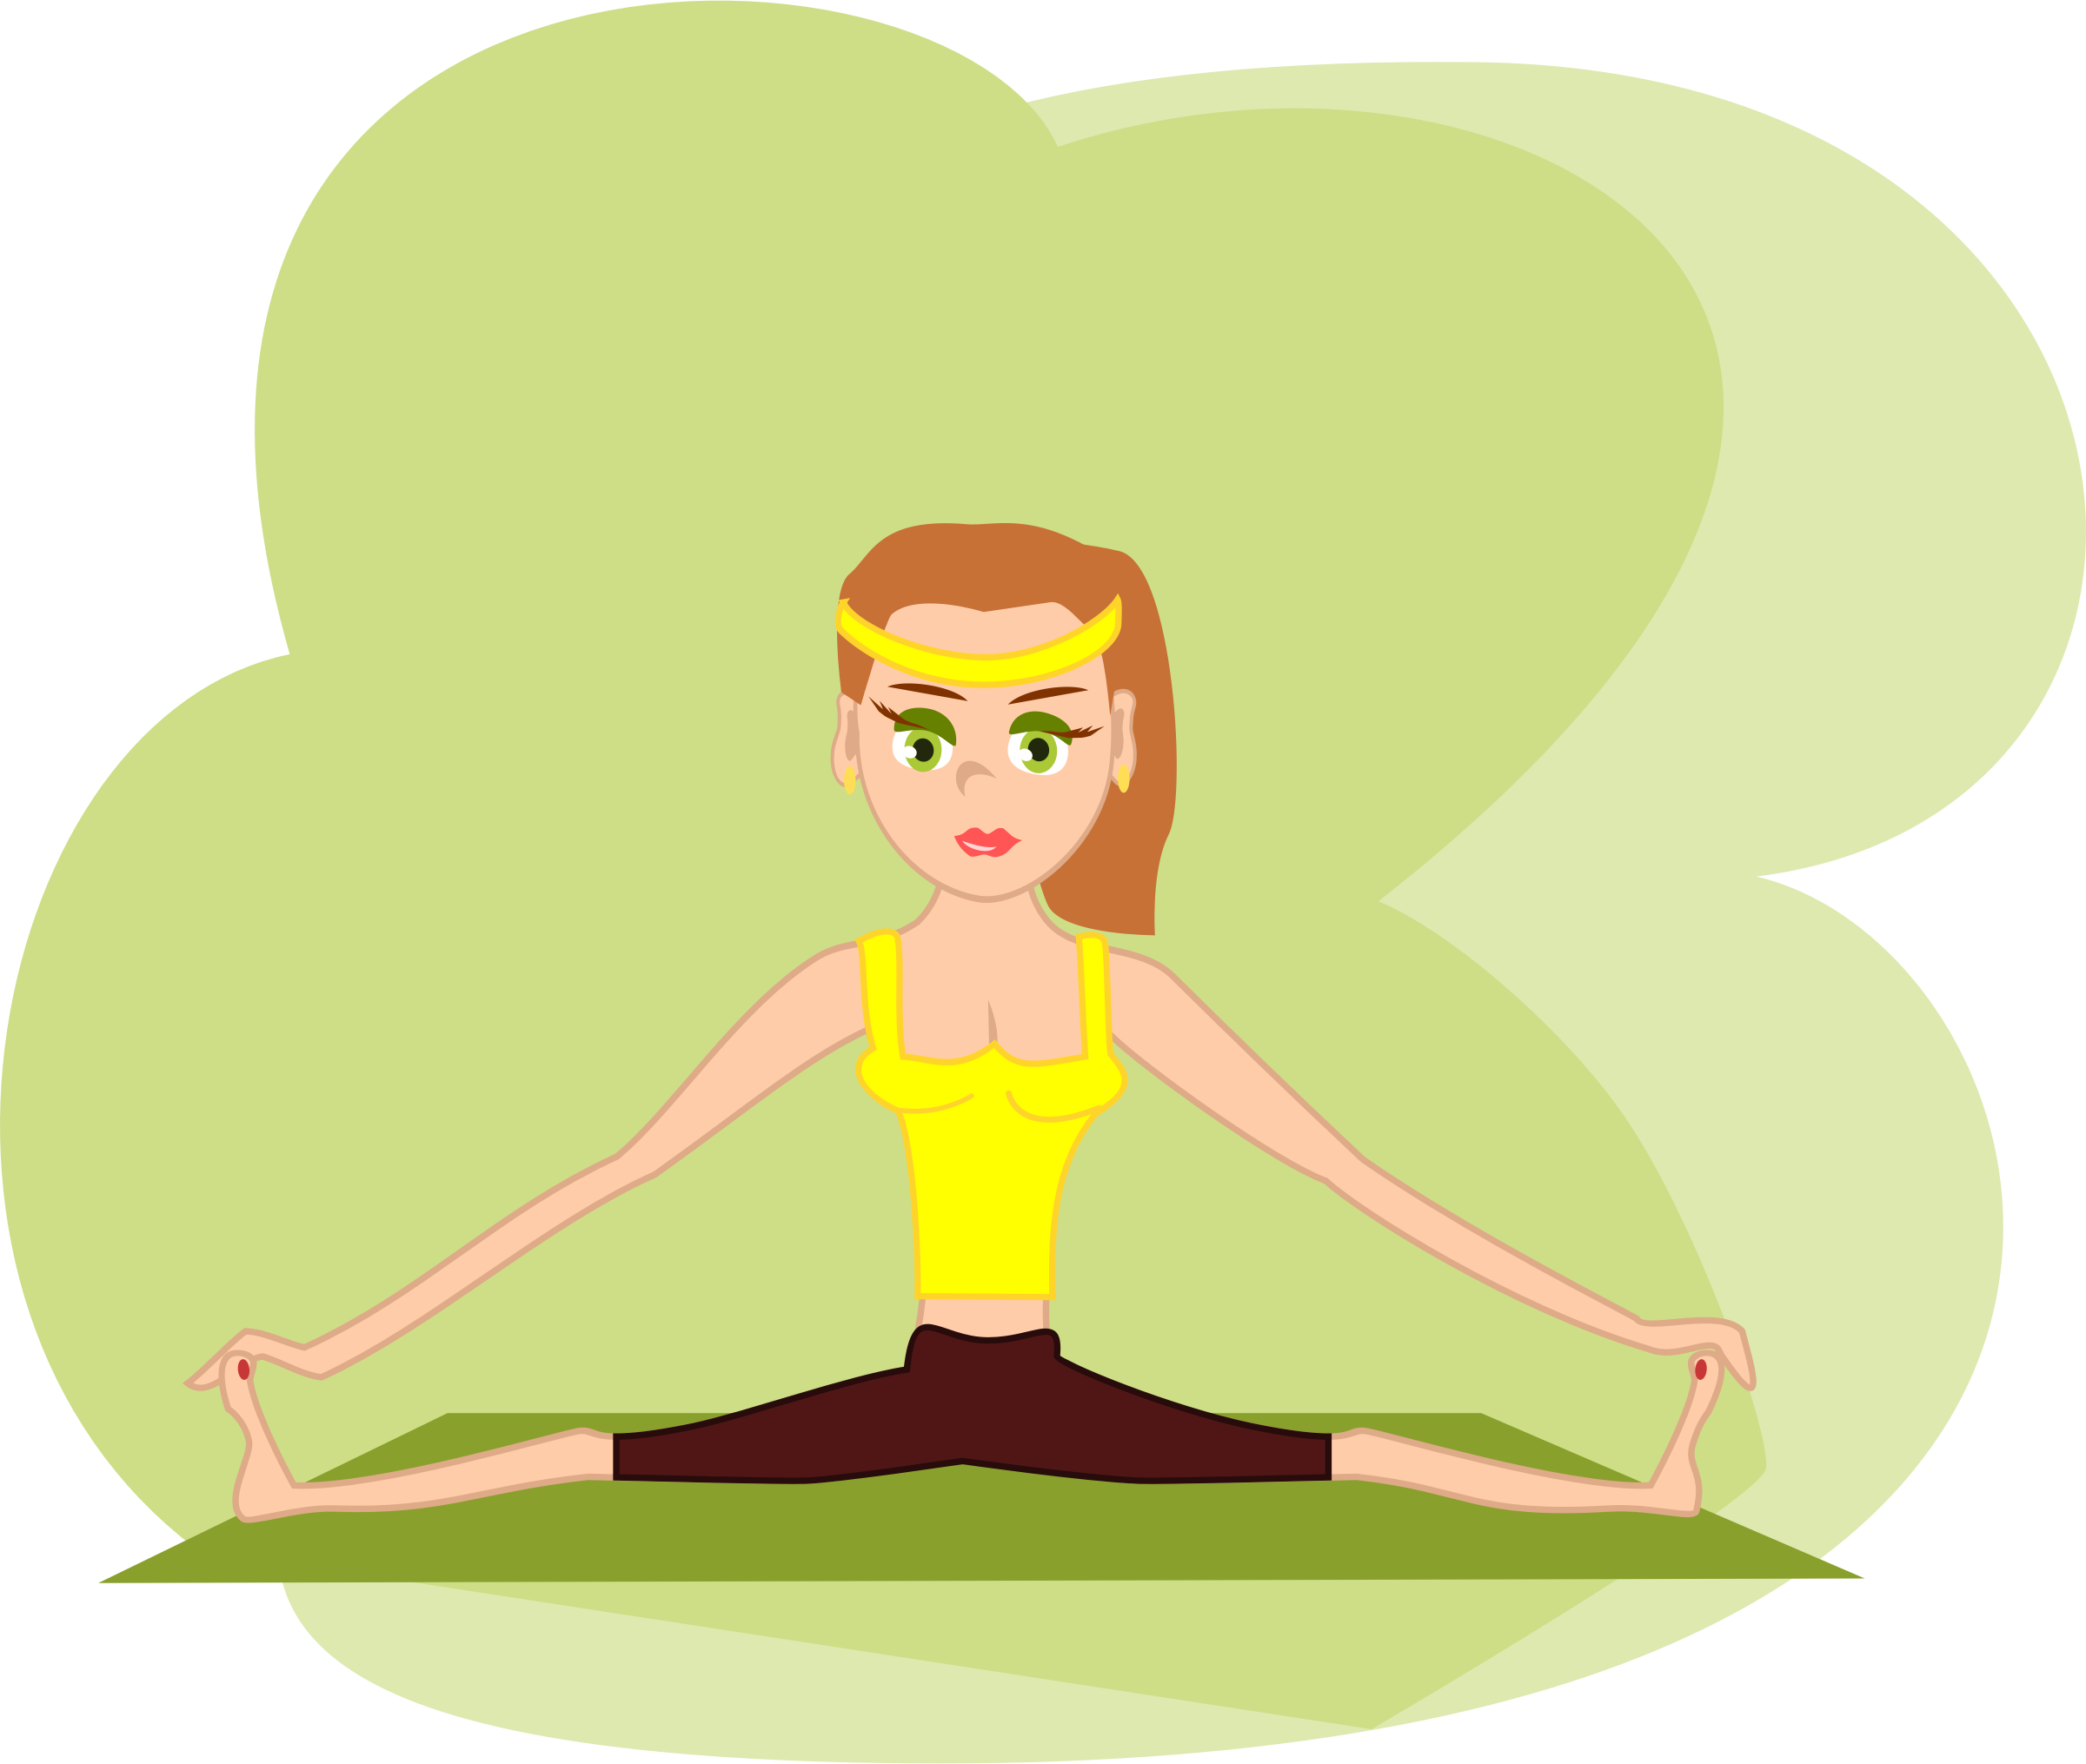 Fitness icons png free. Exercising clipart fit girl